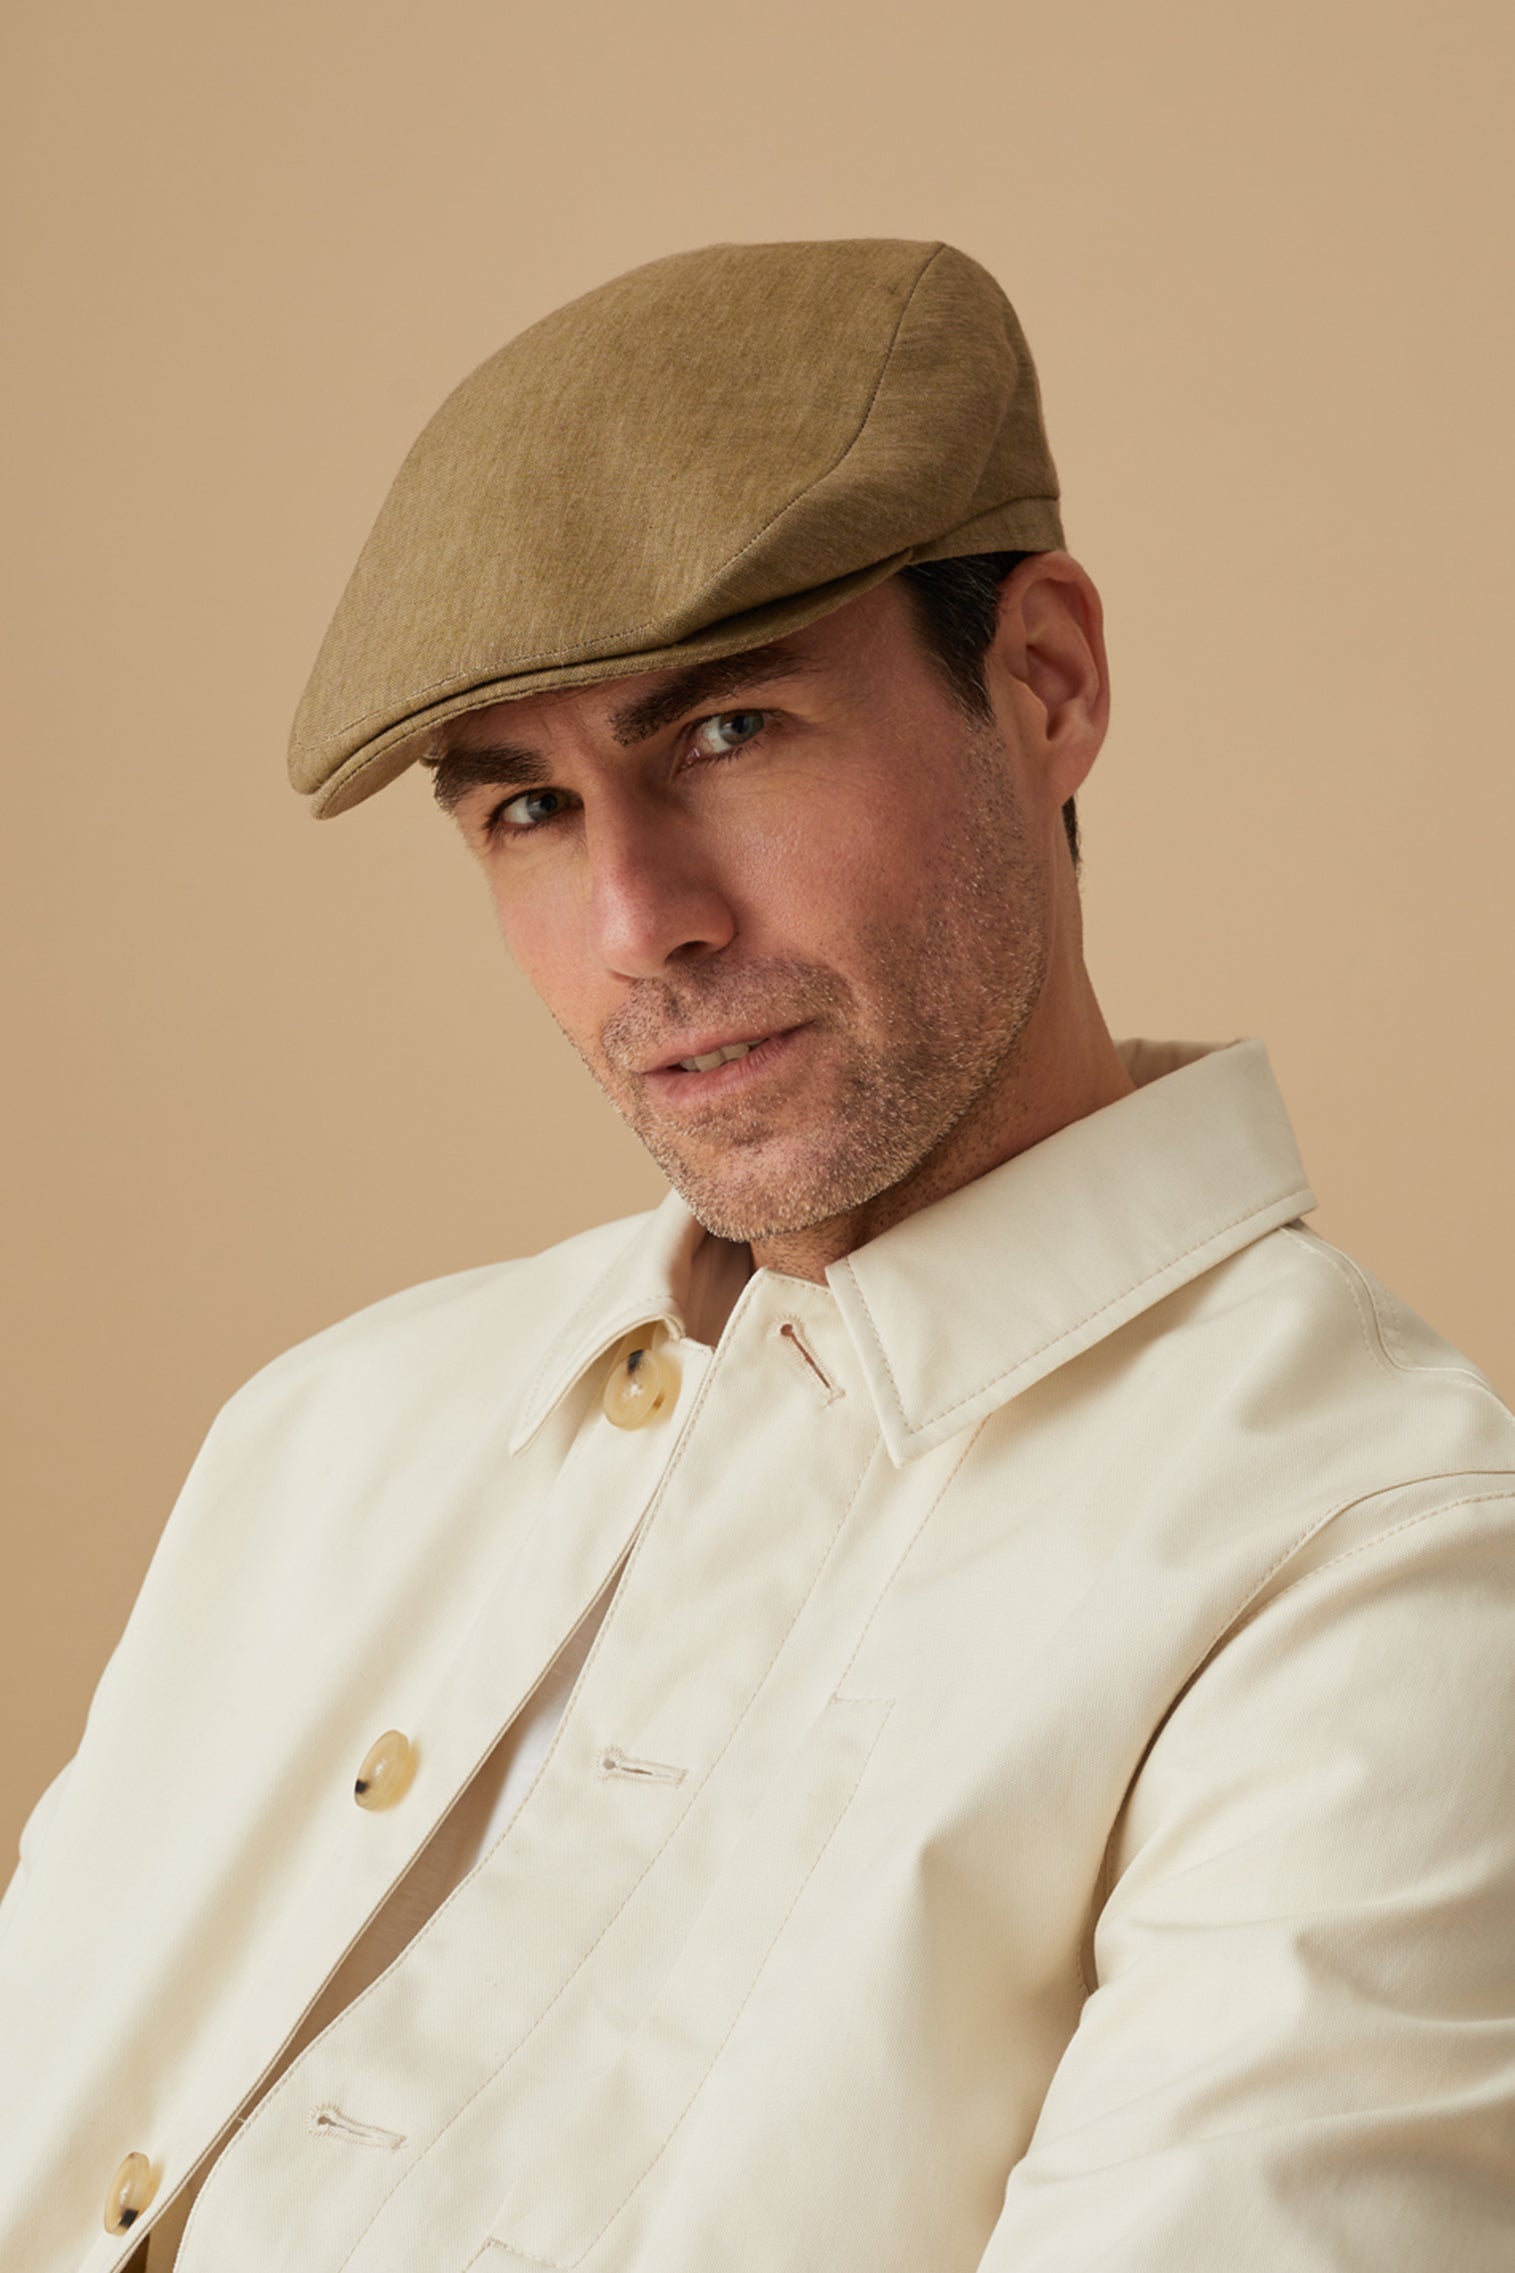 Grosvenor Olive Flat Cap - Hats for Tall People - Lock & Co. Hatters London UK